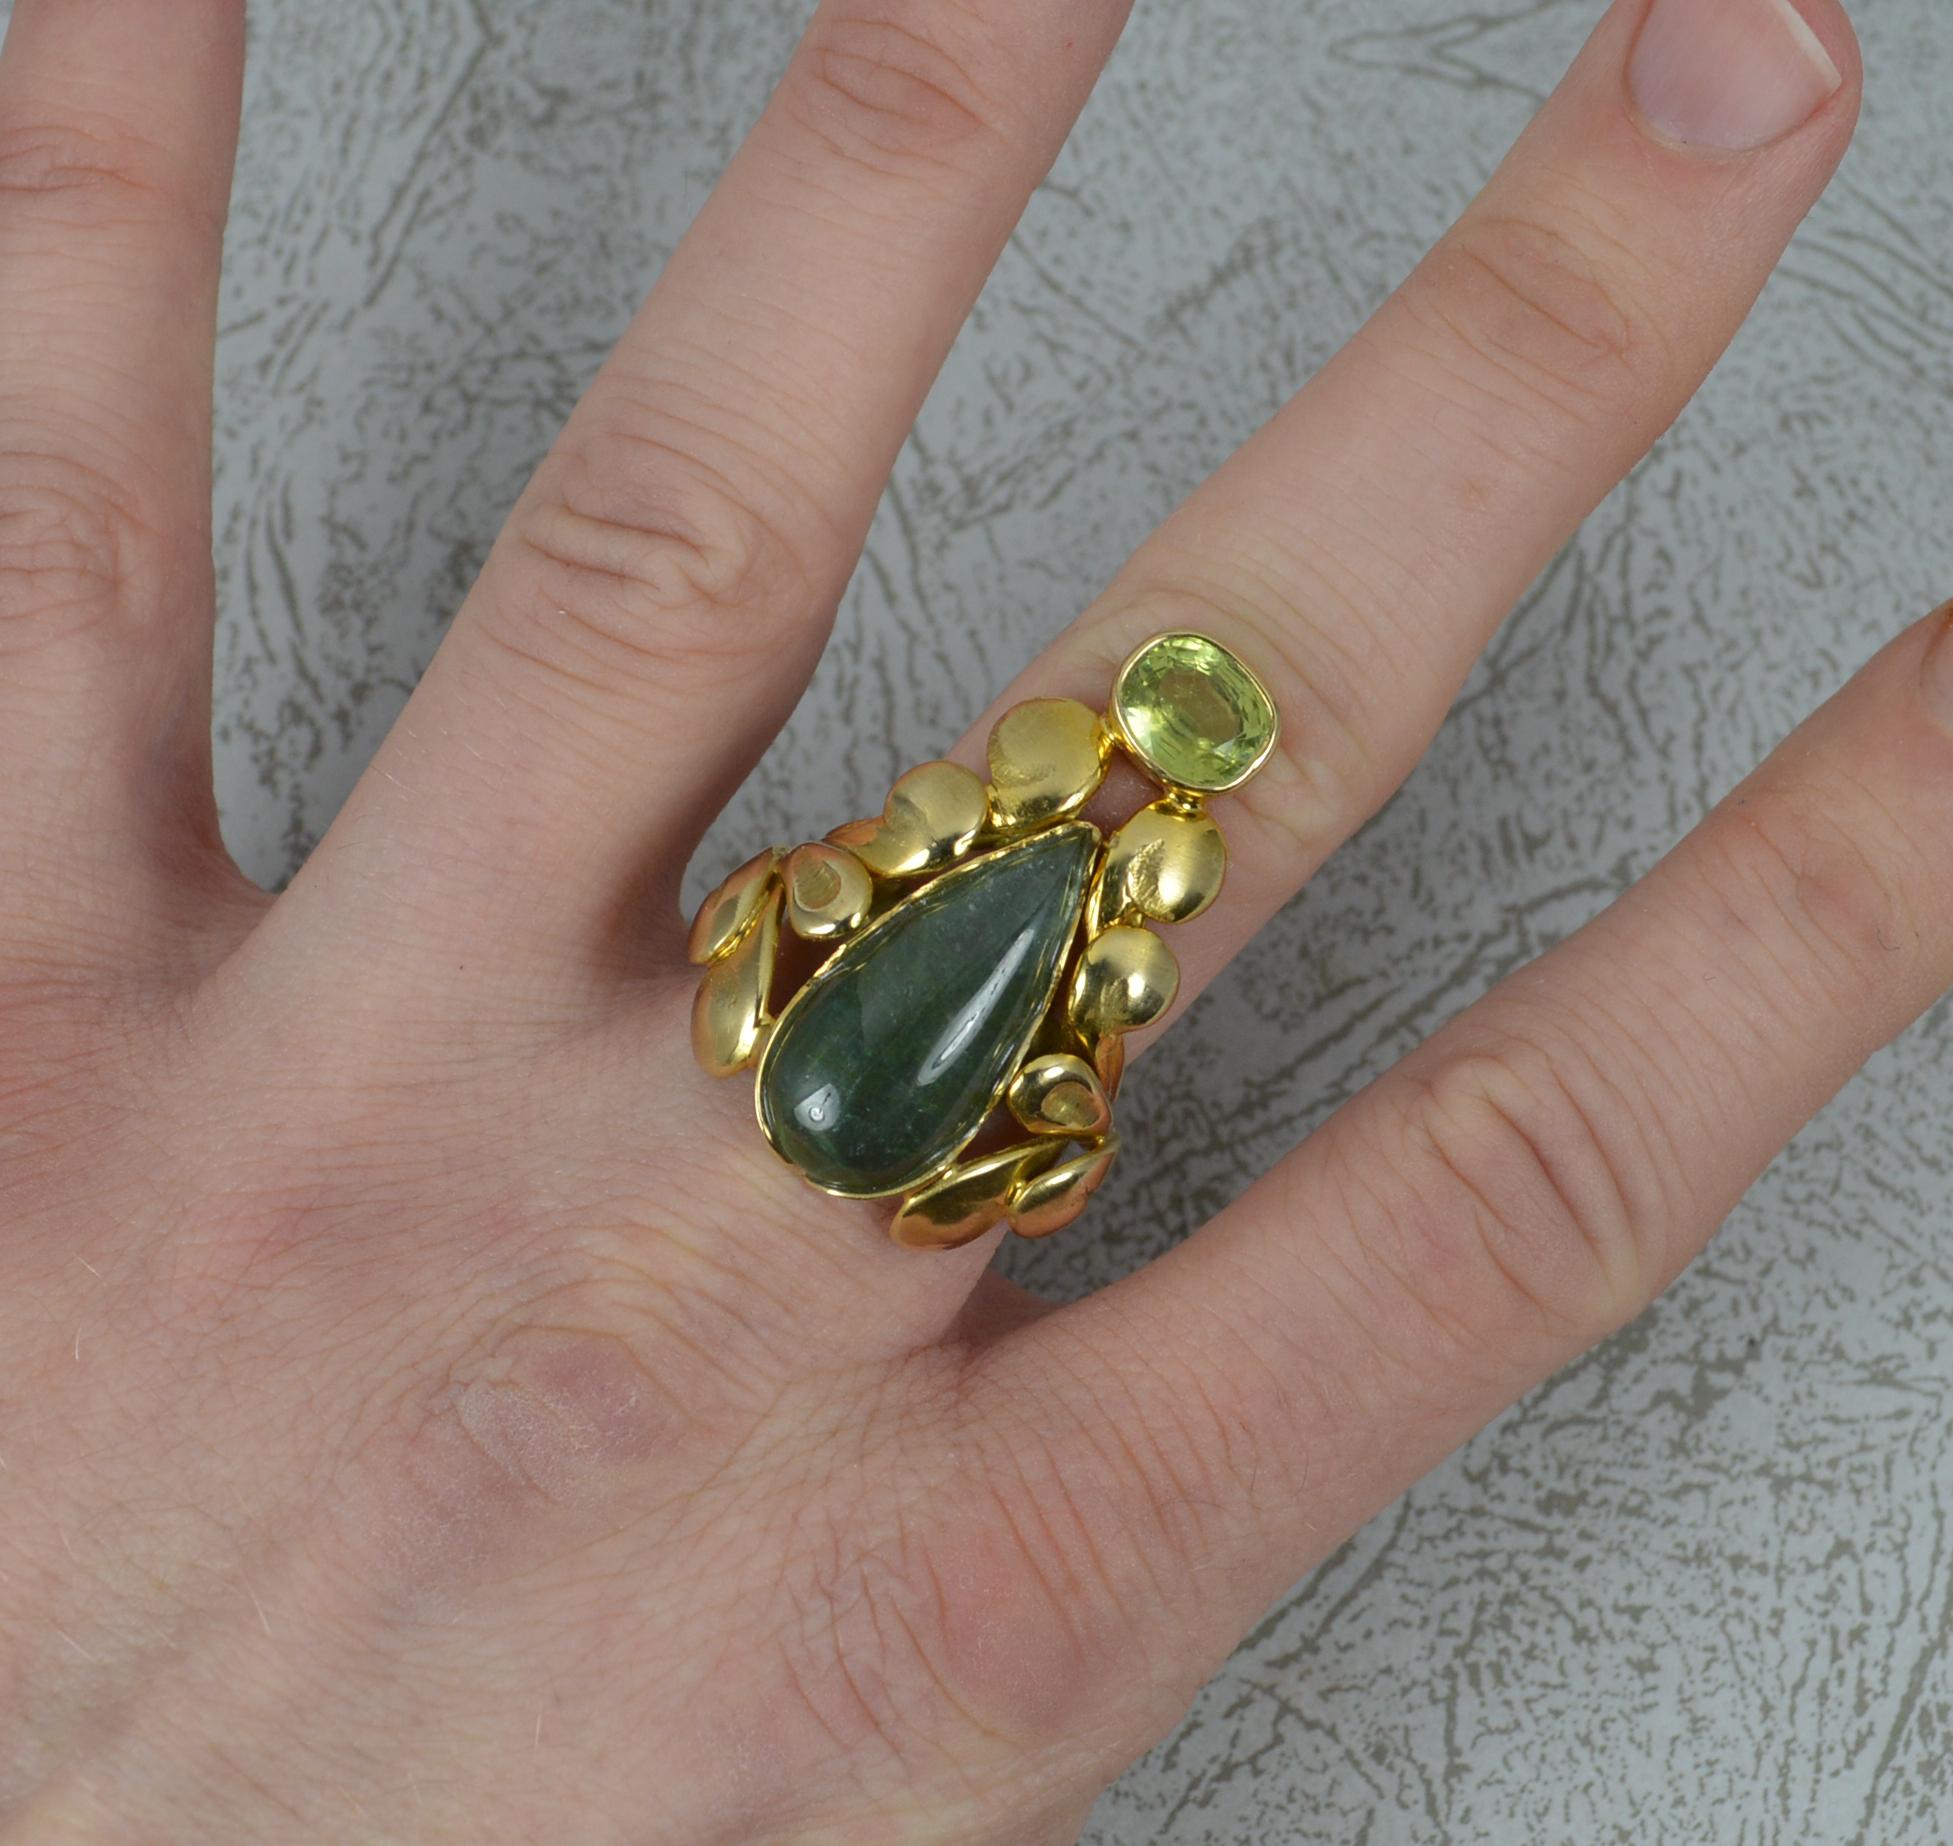 A superb art nouveau influenced ring.
Solid 14 carat yellow gold example.
Designed with a large 11mm x 23mm green tourmaline cabochon to centre with oval peridot set above and a fine gold floral leaf pattern to the sides.
The floral pattern then